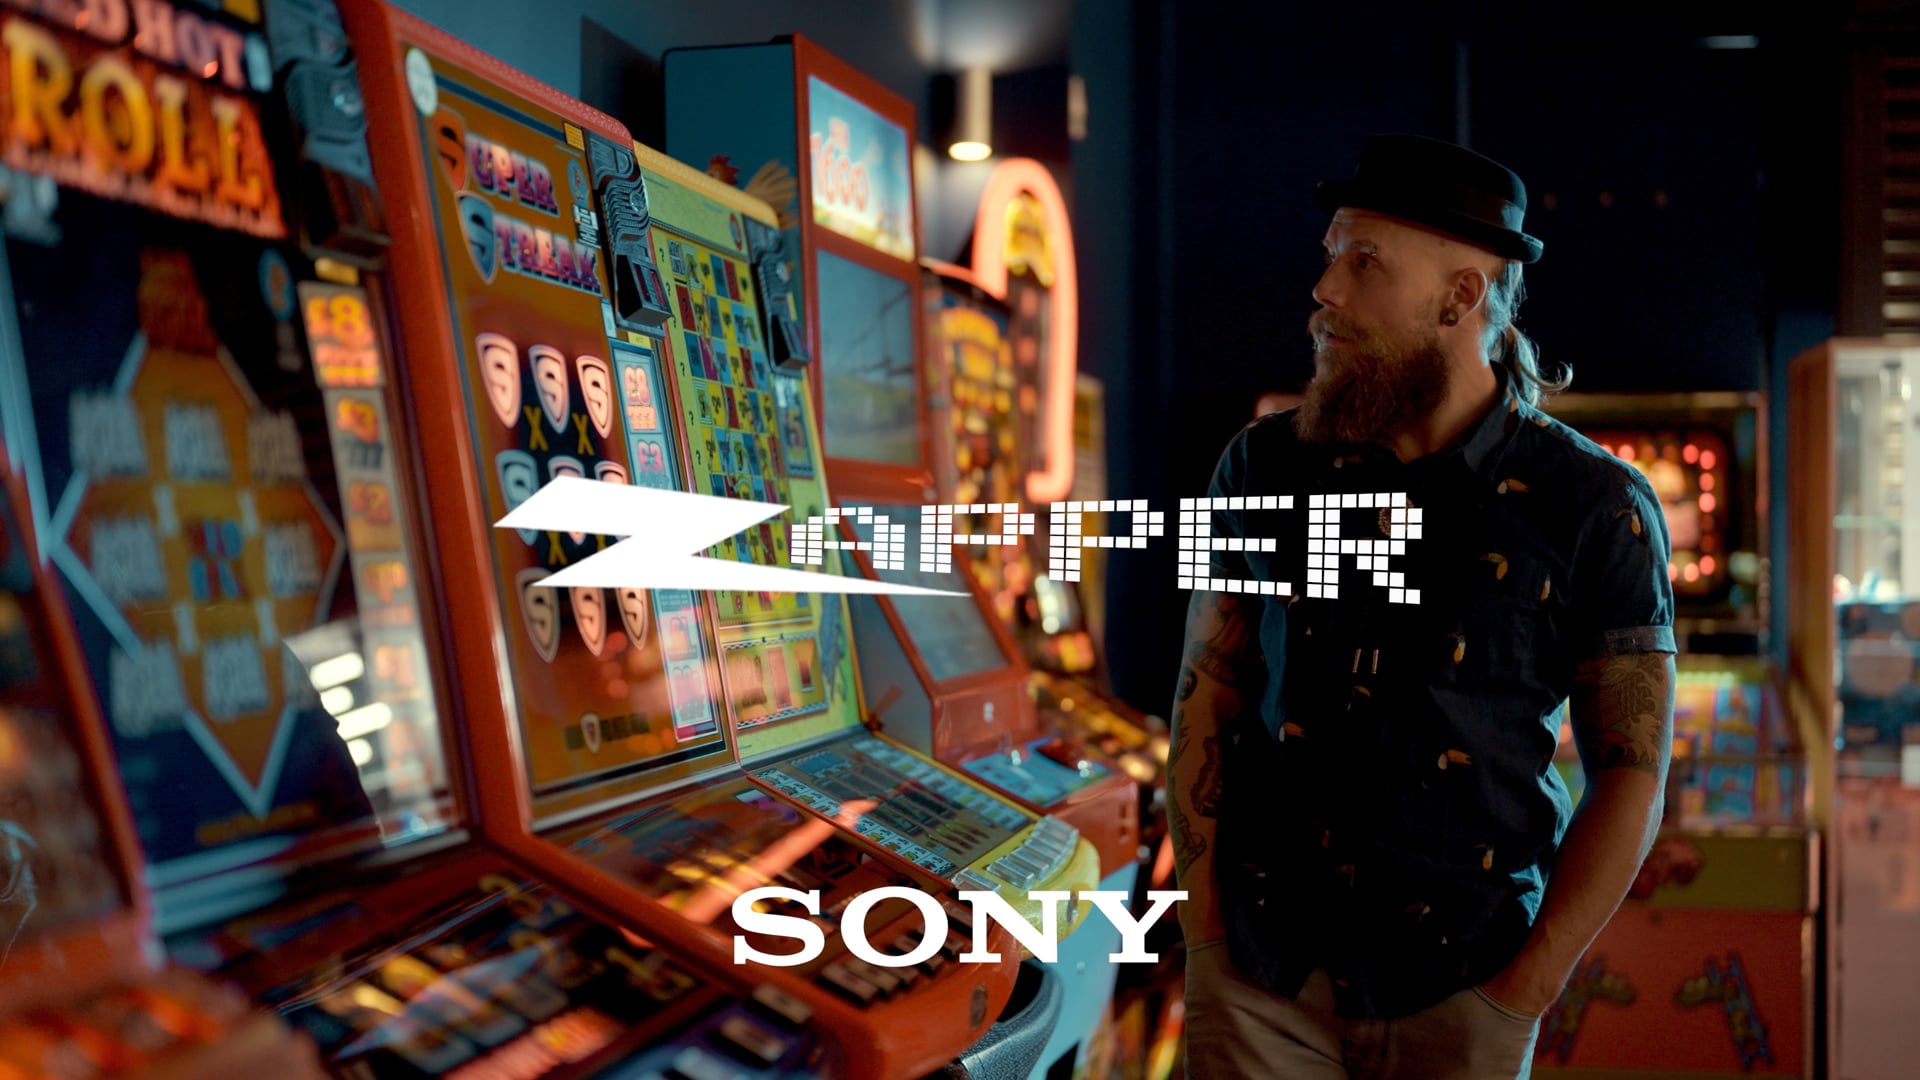 Zapper - A short film shot entirely on the Sony G Master 50mm f1.2 lens